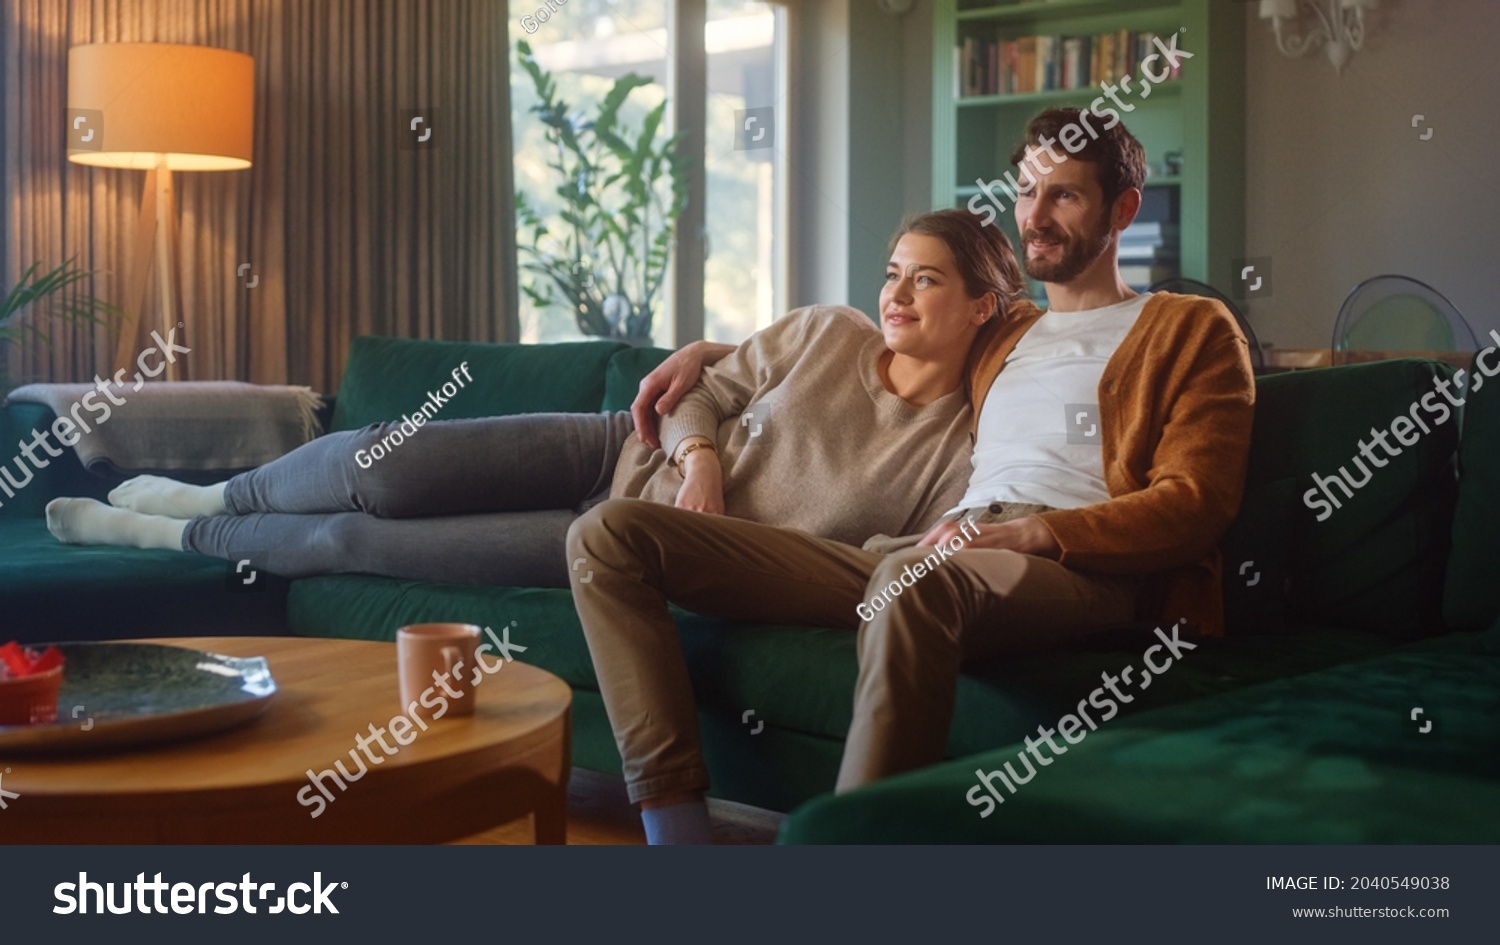 Couple Watches TV together while Sitting on a Couch in the Living Room. Girlfriend and Boyfriend embrace, cuddle, talk, smile and watch Television Streaming Services. Home with Cozy Stylish Interior. #2040549038